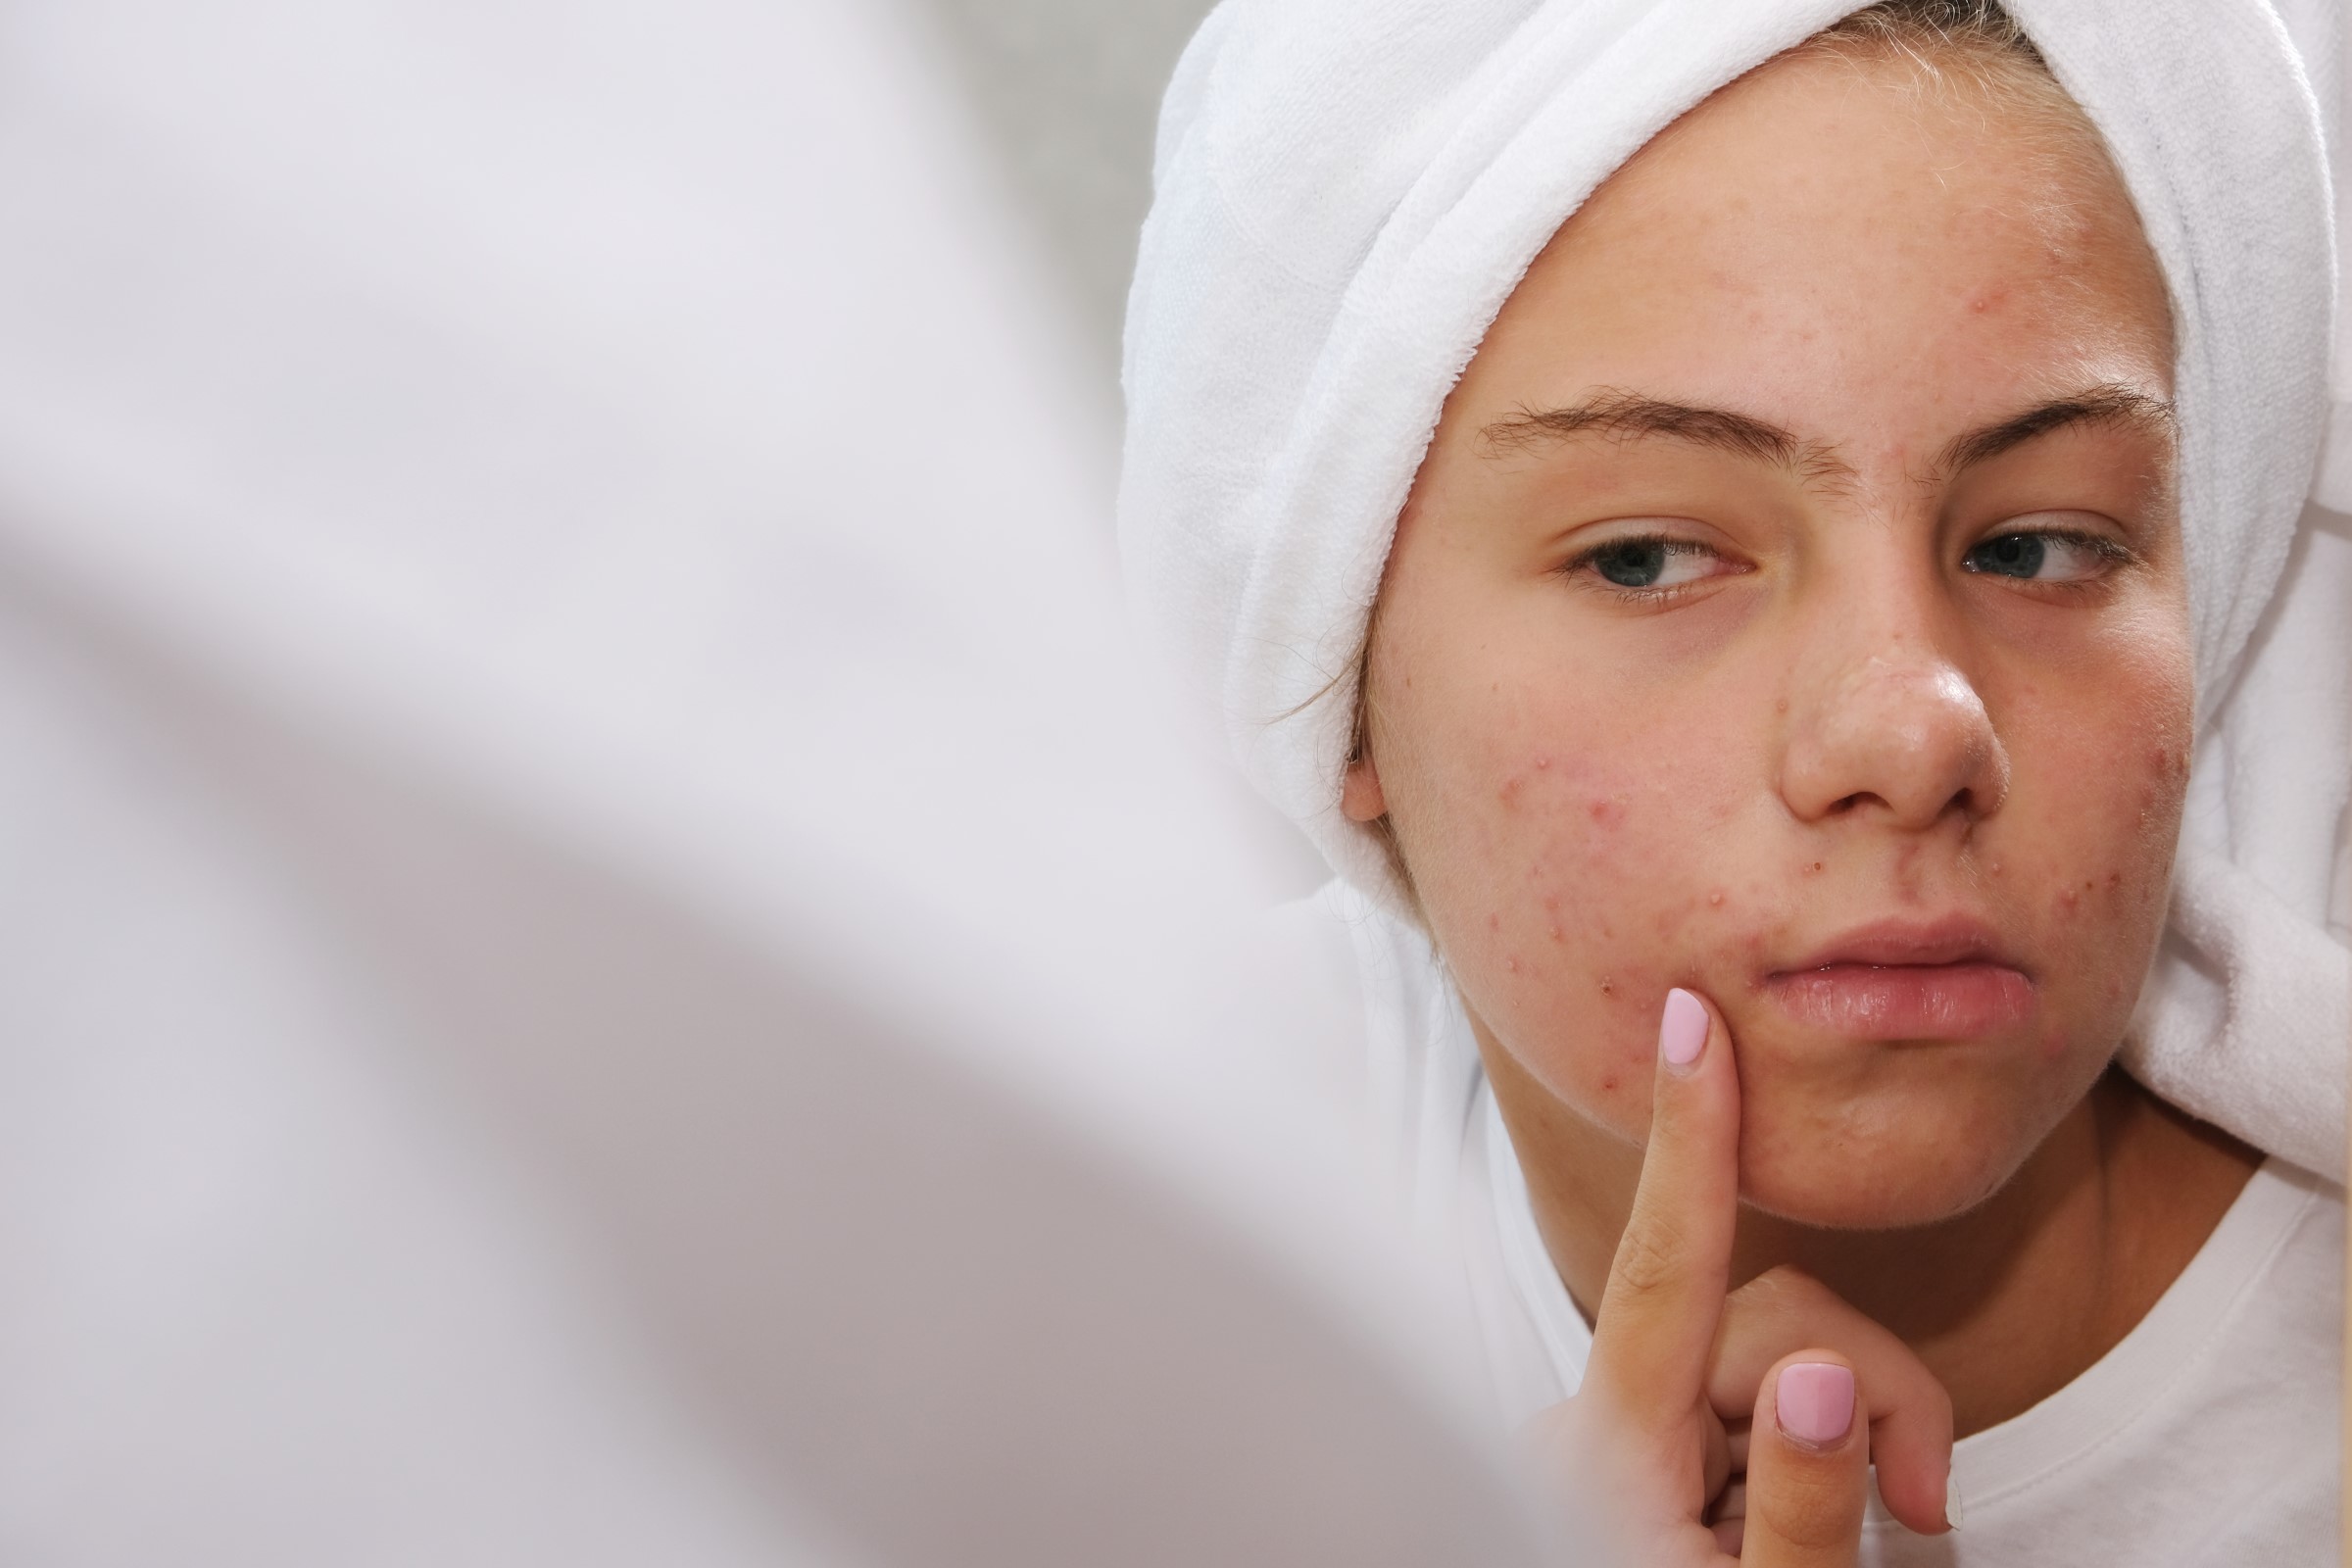 If your acne is flaring up, your brain fog is at an all time high